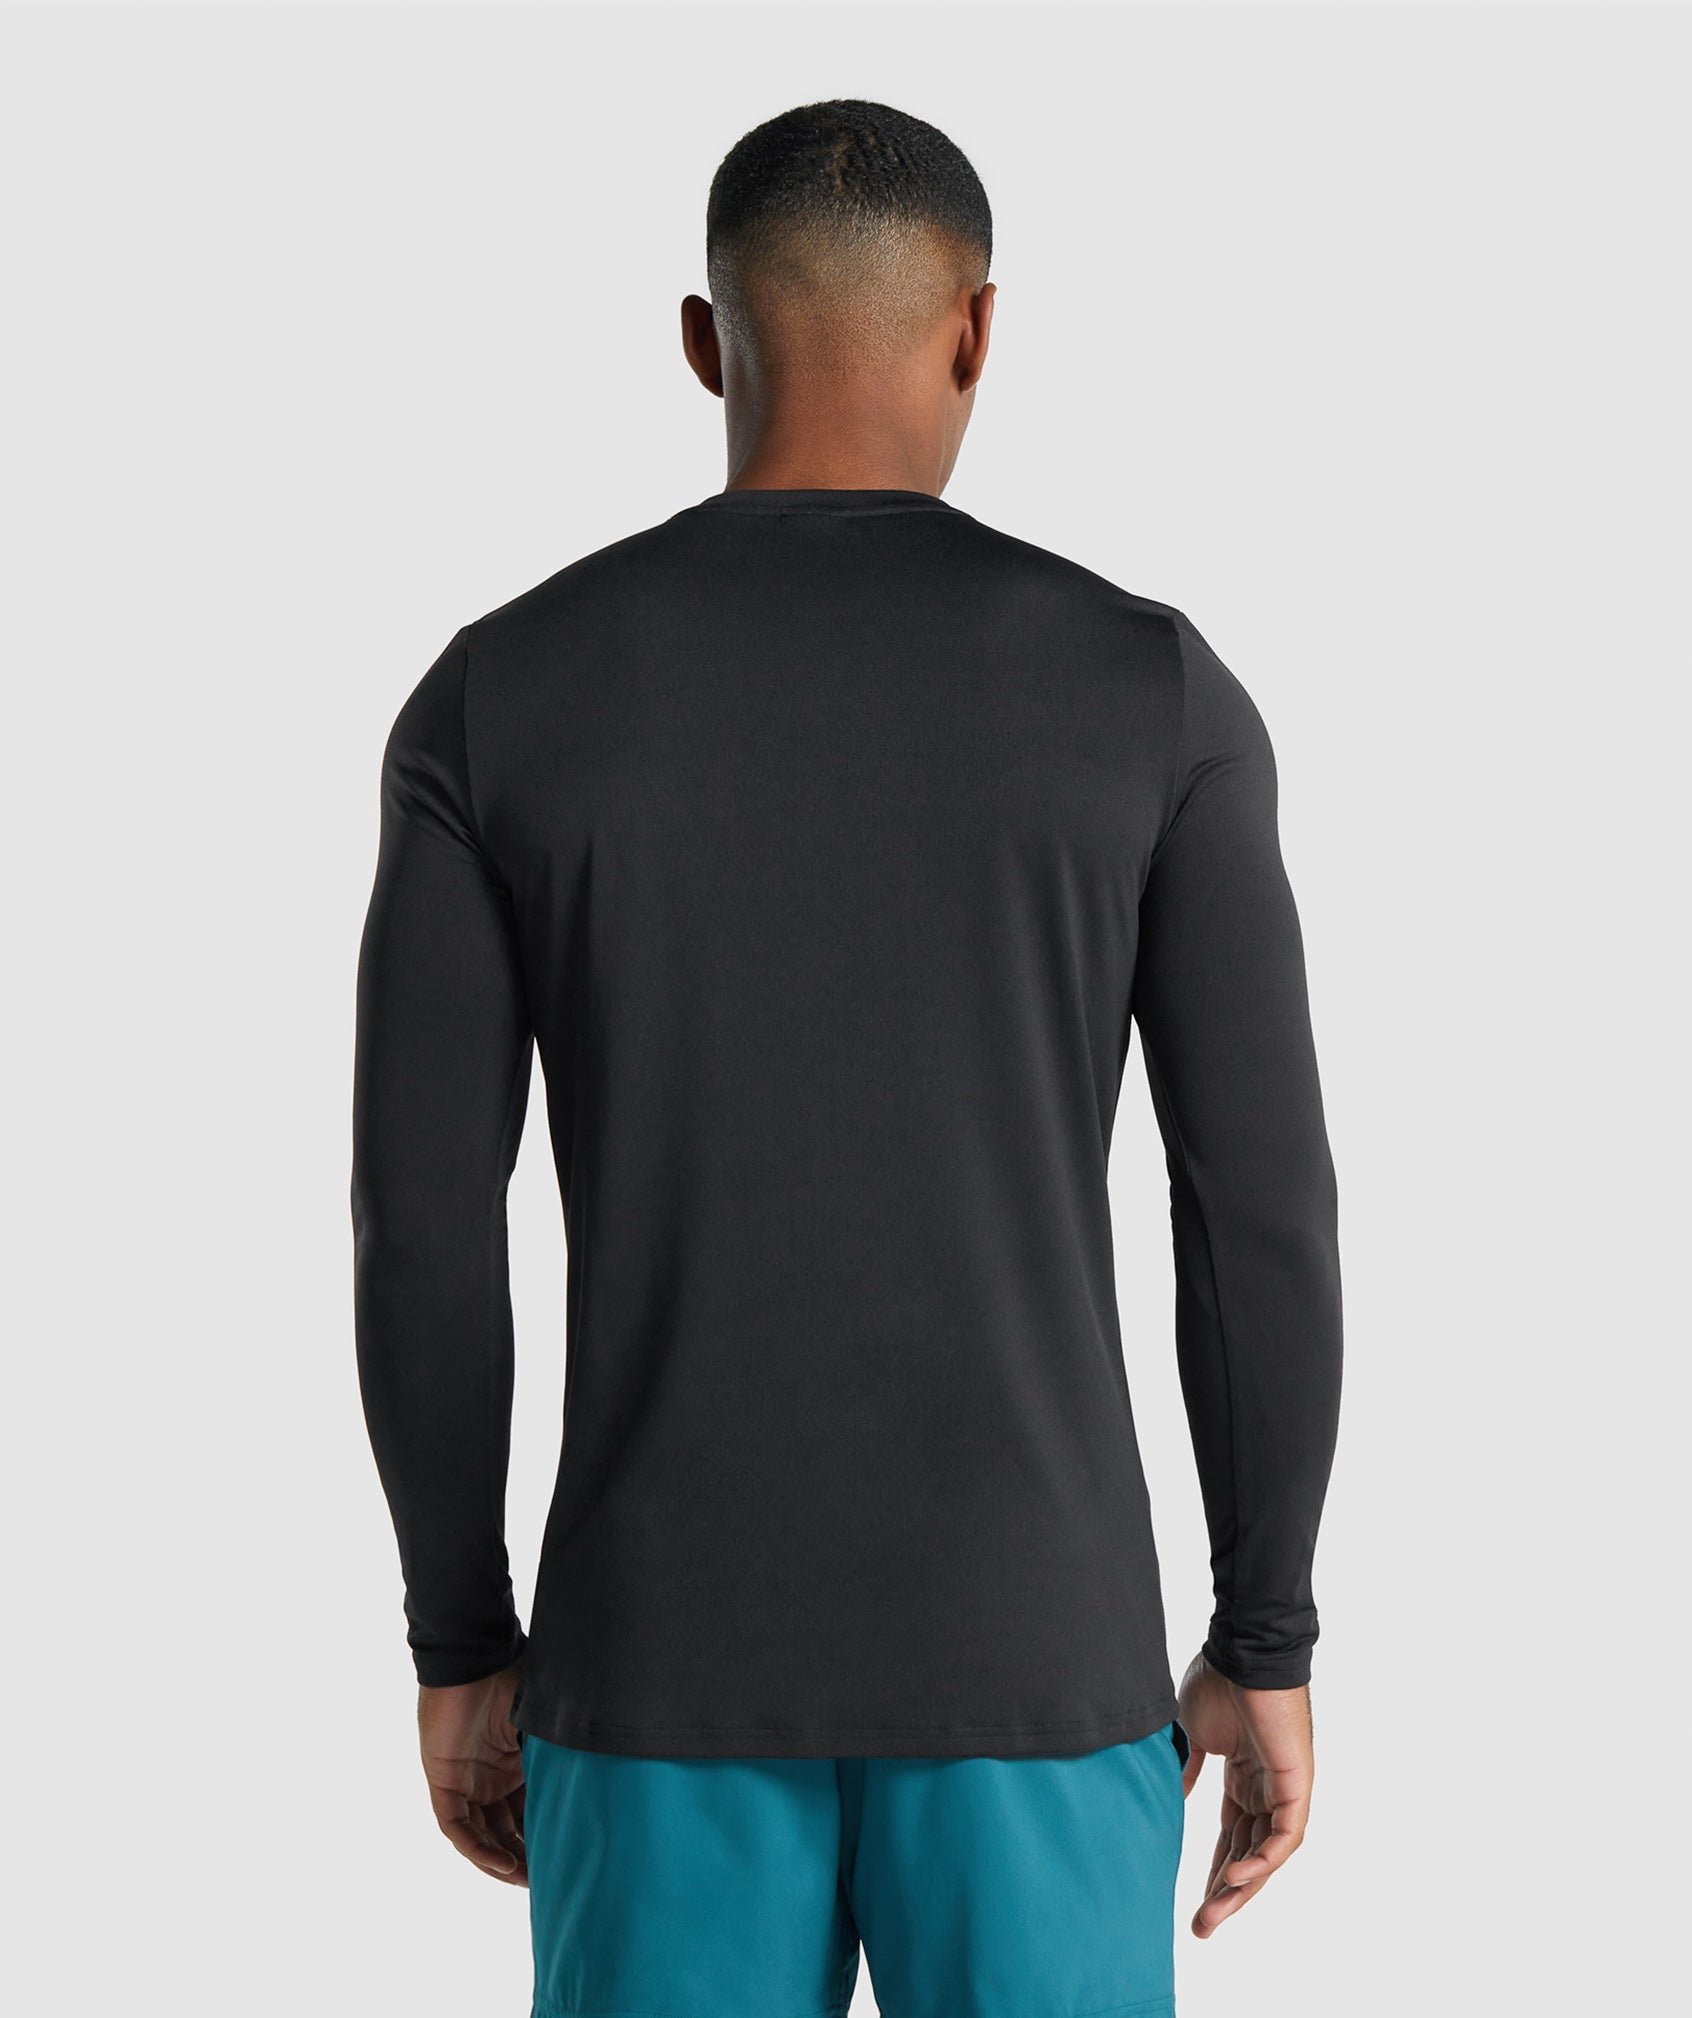 Arrival Long Sleeve Graphic T-Shirt